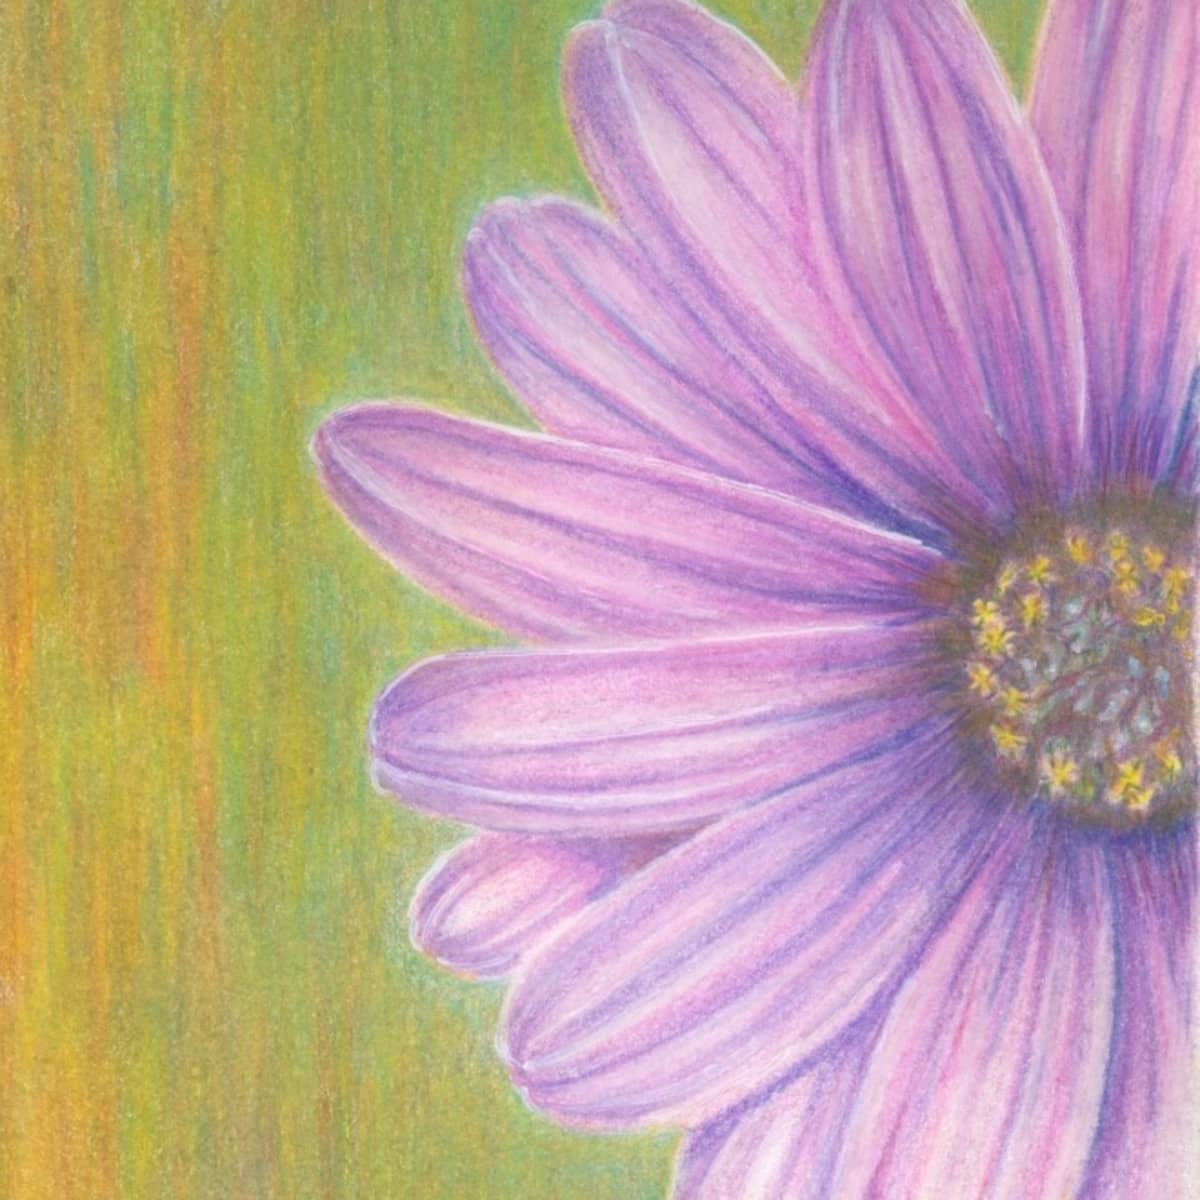 Drawing Flowers With Colored Pencils: 5 Simple Steps | Craftsy |  www.craftsy.com